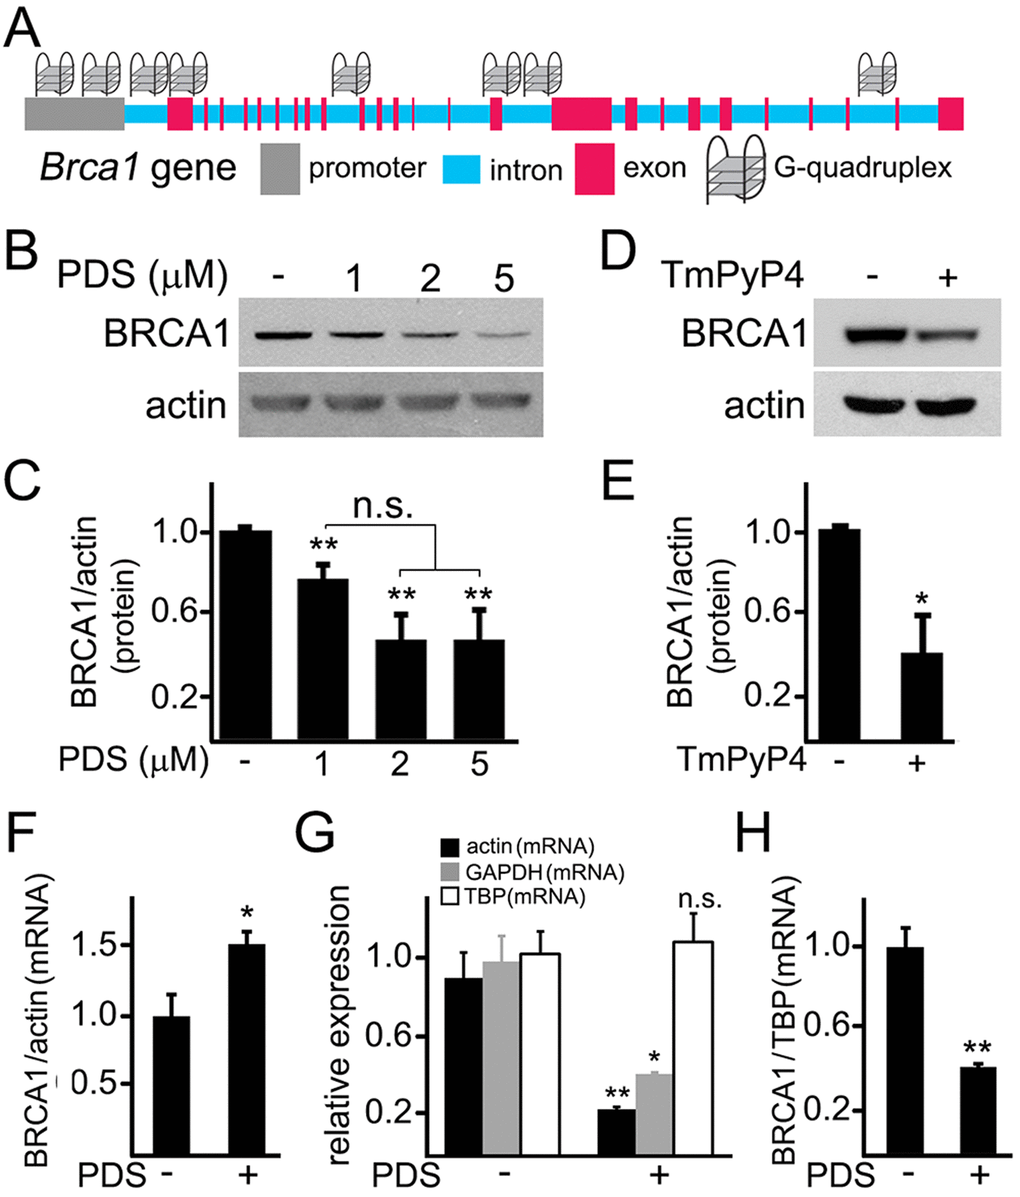 Pyridostatin downregulates BRCA1 levels in primary neurons. (A) A scheme of the Brca1 gene and its promoter showing putative G-quadruplex sequences. (B) Primary neurons were treated with a vehicle (control, -) or with different concentrations of pyridostatin (PDS; 1, 2 or 5 μM) overnight. Then neurons were collected, lysed, and samples were processed with western blotting. Note that pyridostatin reduced BRCA1 protein levels in a dose-dependent manner. Actin was used as a loading control. (C) Quantification of BRCA1 protein levels normalized to actin from (B). **p(cont-1 μM)=0.005, **p(cont-2 μΜ)=0.0015, **p(cont-5 μΜ)=0.0043 (ANOVA). N.s., non-significant, p(1 μΜ−2 μΜ)=0.0547, p(1 μΜ−5 μΜ)=0.0854. Results were pooled from five independent experiments. (D) Primary neurons were treated with a vehicle (control, -) or with a G-quadruplex stabilizing drug, TmPyP4 (1 μM), overnight. Neurons were lysed, and samples were processed by western blotting. TmPyP4 reduced BRCA1 protein levels. Actin was used as a loading control. (E) Quantification of BRCA1 protein normalized to actin from (D). *pF) Primary neurons were treated with a vehicle (control; -) or with 2 μM pyridostatin (PDS; +) overnight. The expression of Brca1 was determined by qRT-PCR relative to Actin. *p=0.0445 (t-test). Results were pooled from three independent experiments. (G) Primary neurons were treated with a vehicle (control; -) or with 2 μM pyridostatin (PDS; +) overnight. Relative expression of the Actin, Gapdh and Tbp genes was determined by qRT-PCR. *p=0.0112, **p=0.0039 (t-test). N.s., non-significant (p=0.7583). Results were pooled from three independent experiments. (H) Primary neurons were treated with a vehicle (control; -) or with 2 μM pyridostatin (PDS; +) overnight. The expression of Brca1 was determined by qRT-PCR normalized to Tbp. **p=0.0033 (t-test). Results were pooled from three independent reactions.